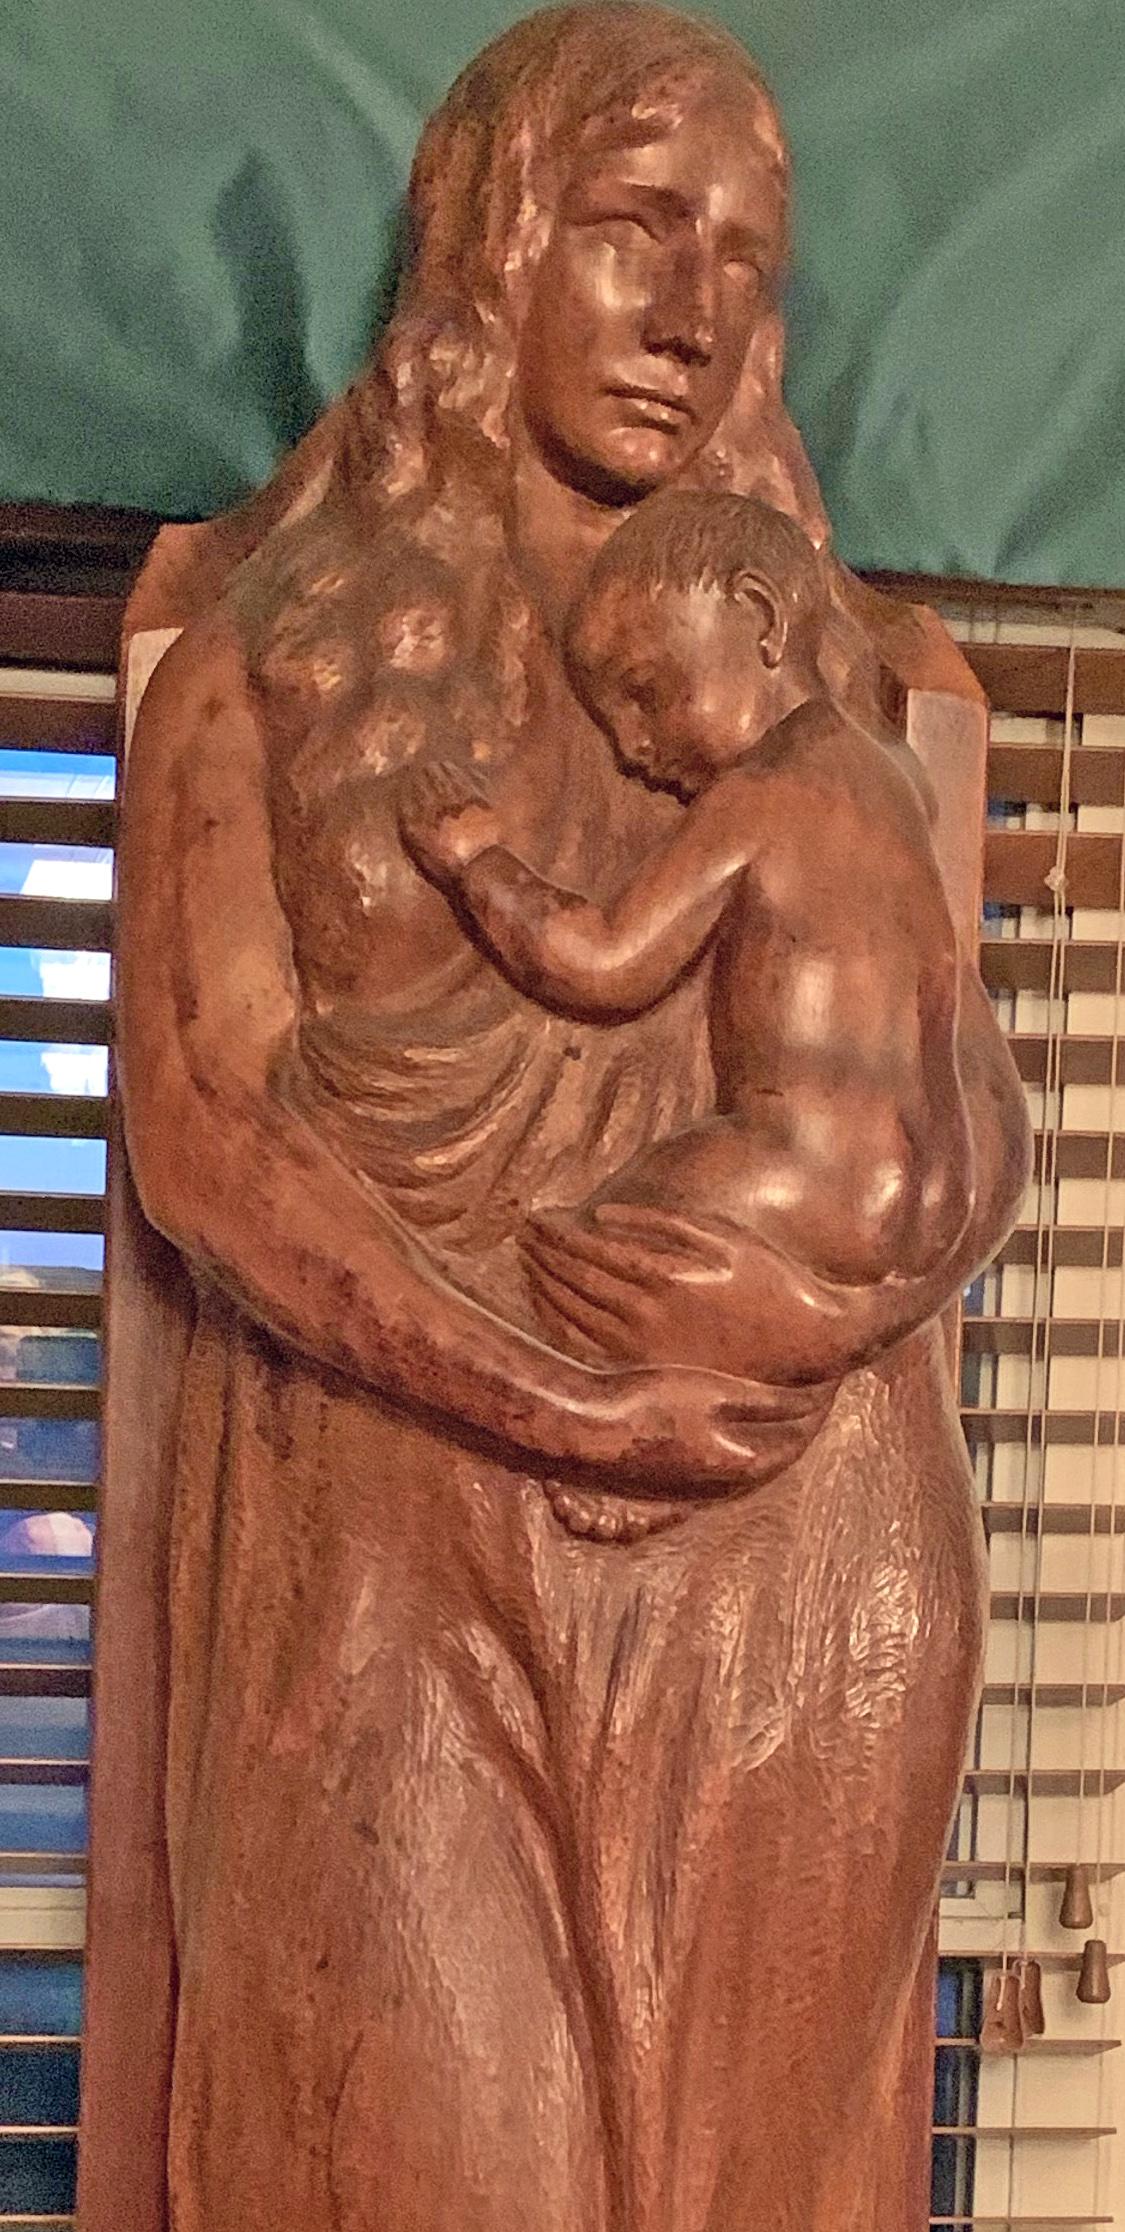 Large and highly affecting, this 52-inch high mahogany sculpture of a woman holding her child, looking out pensively into the world, won the Frank Logan Medal of the Arts at the 22nd Chicago Artist Exhibition in 1918. It is the greatest masterpiece